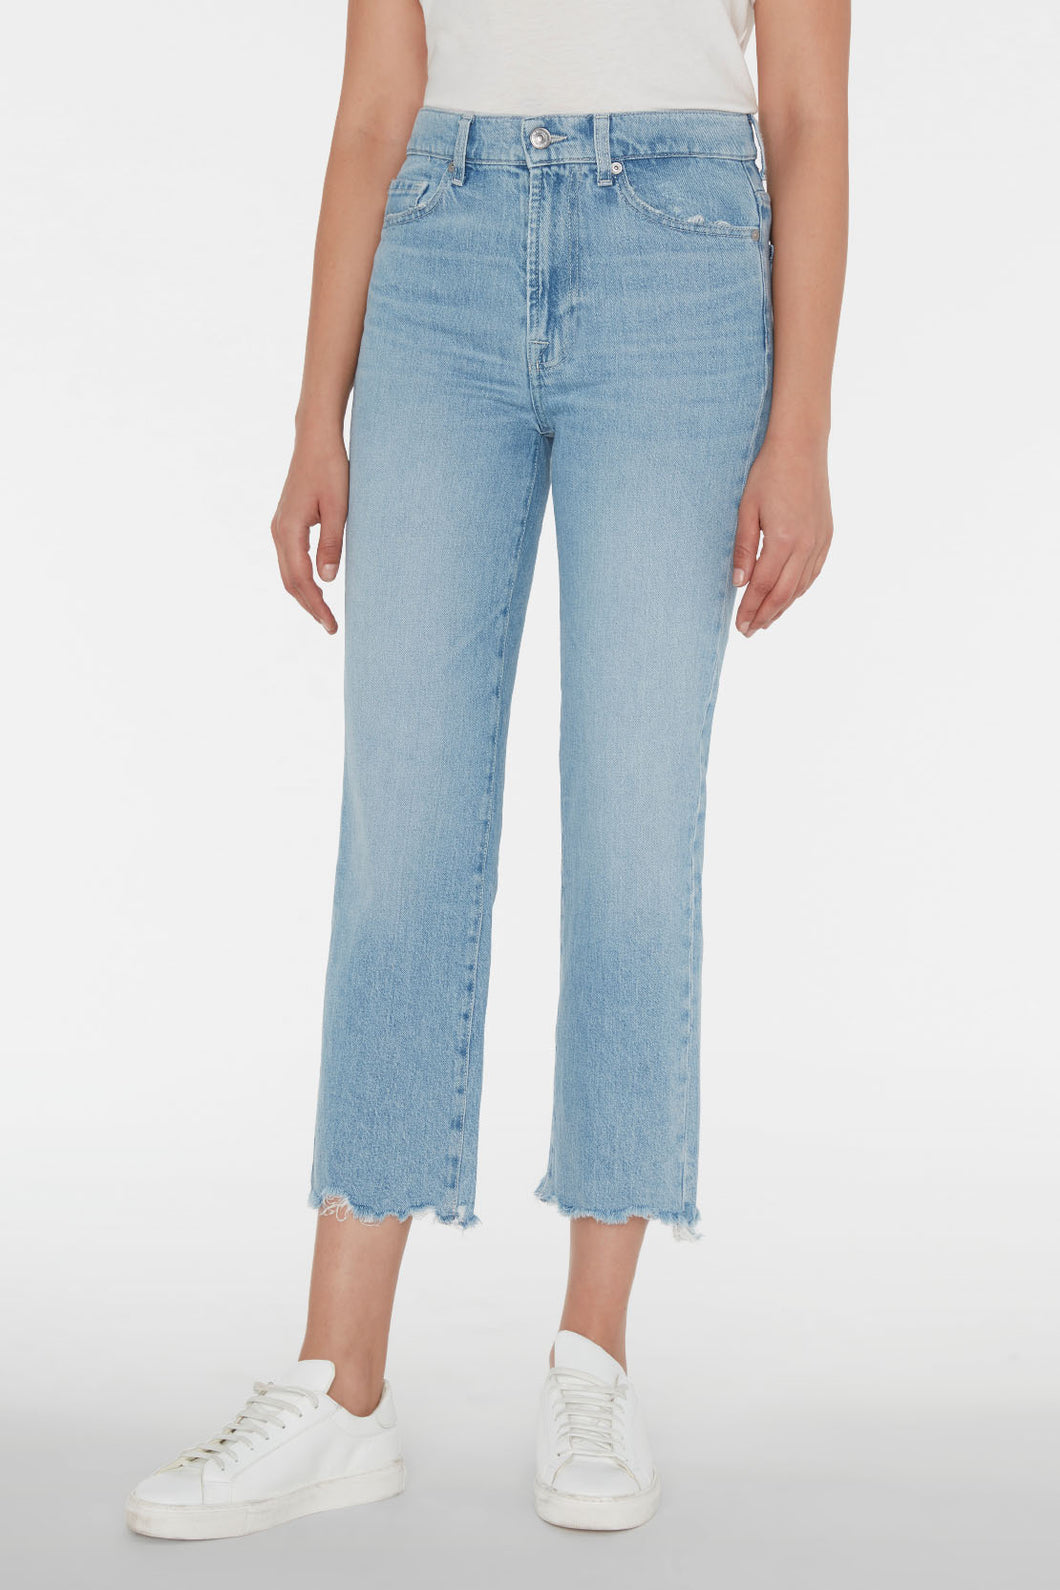 For All Mankind - Logan Stovepipe Babe with Destroyed Hem Jeans